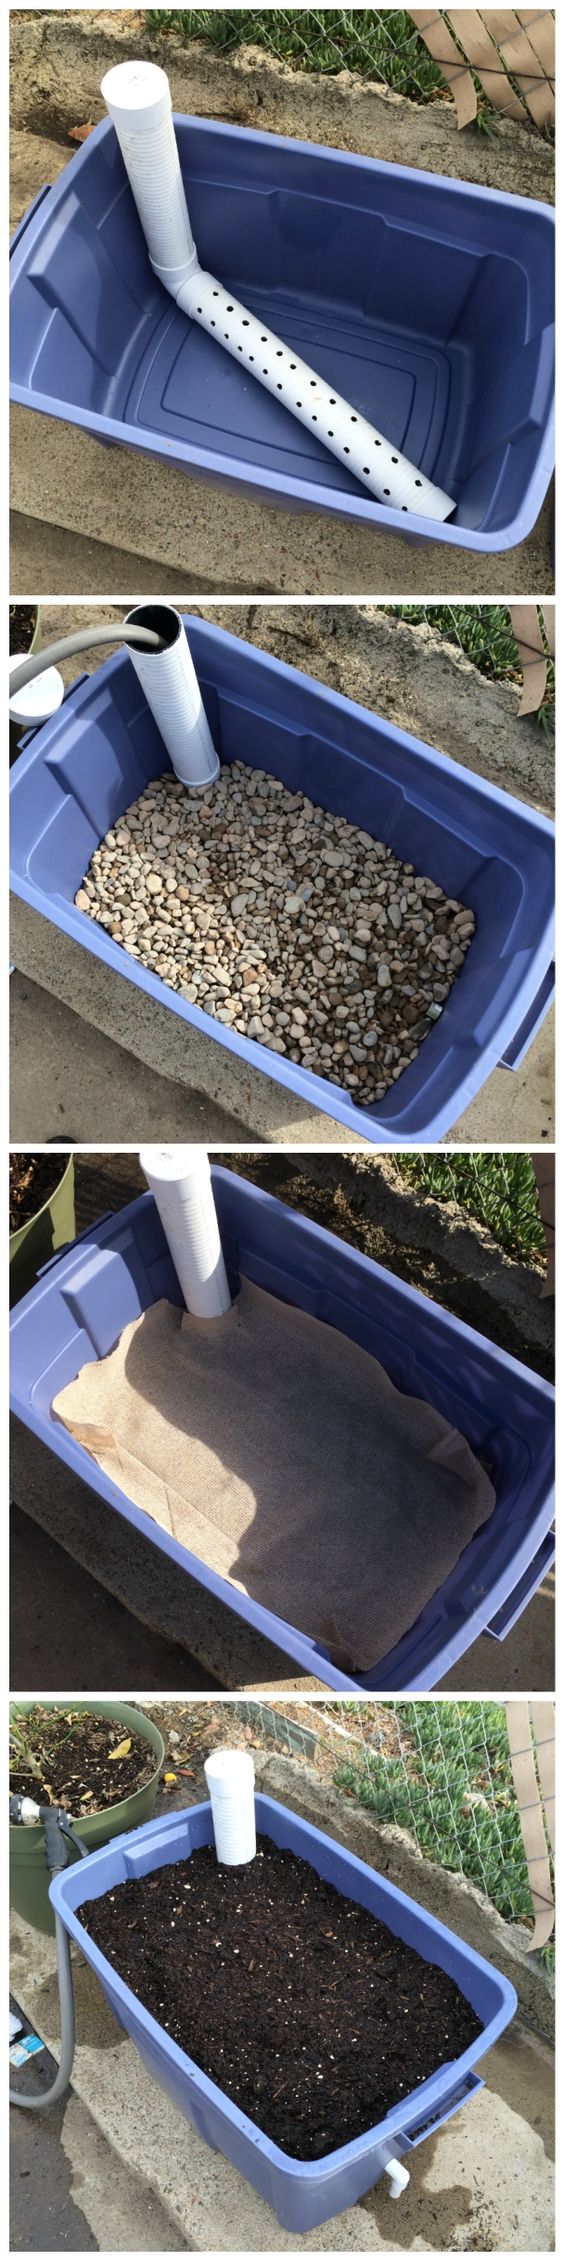 DIY Wicking Bed Container gardening. This is a great idea to ensure less and enough water for your plants.